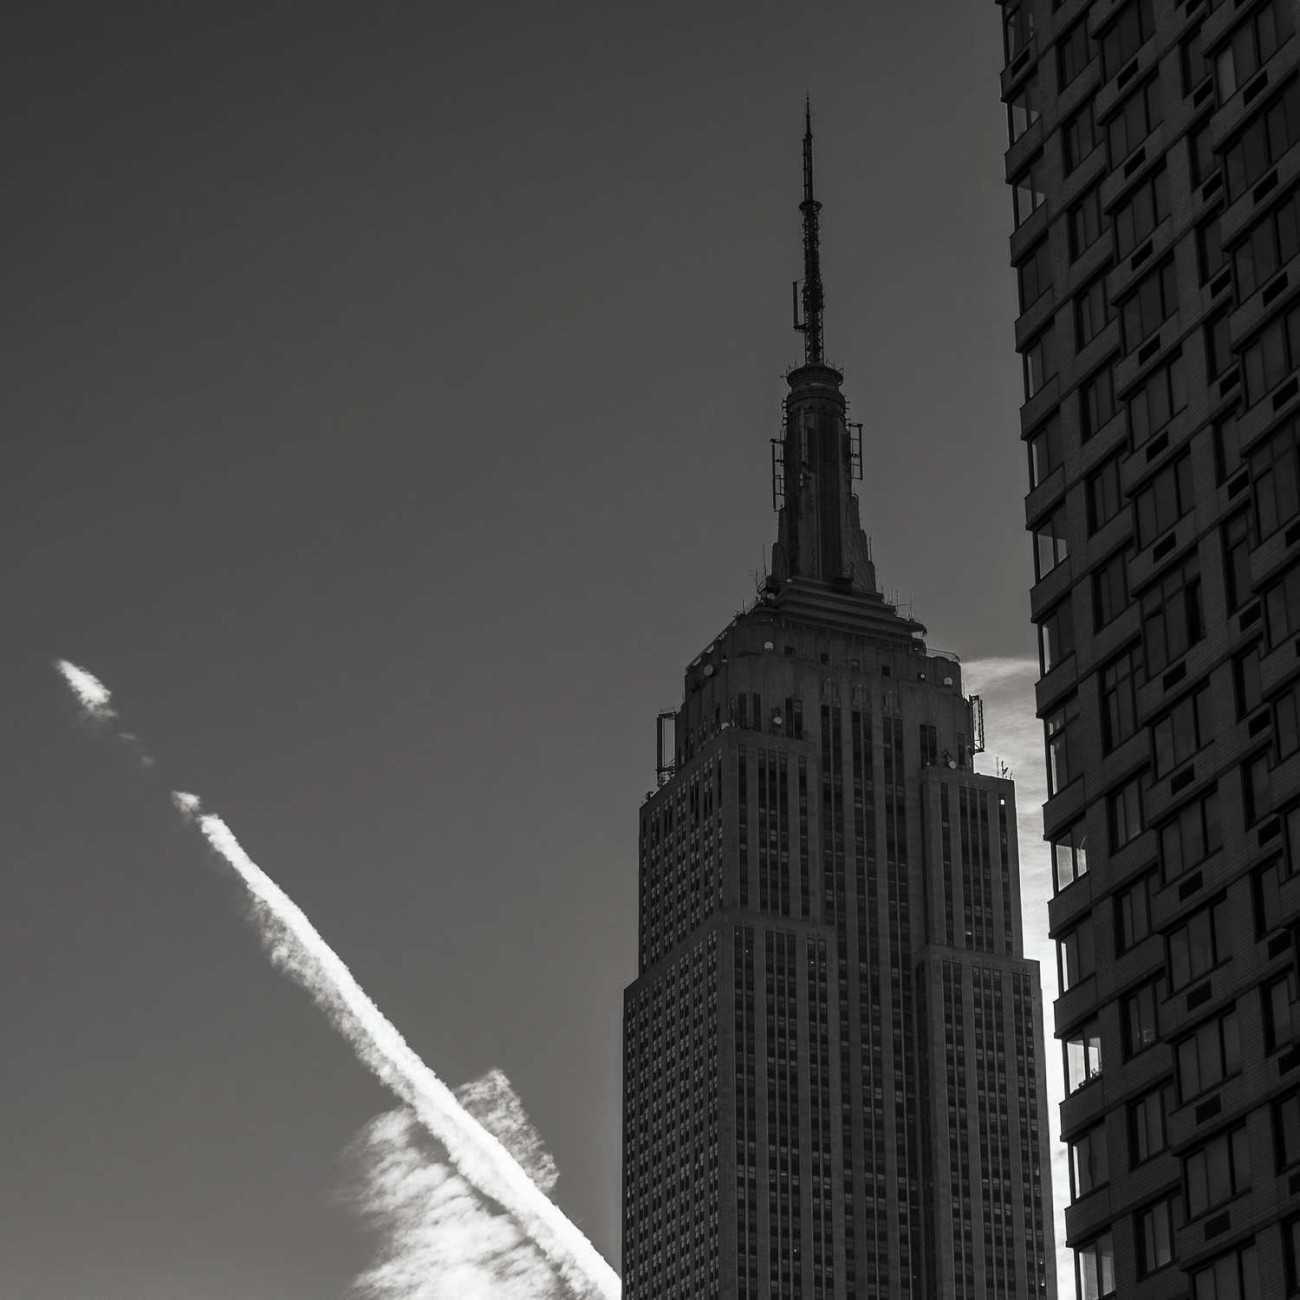 Empire State Building and contrail, New York, 2014